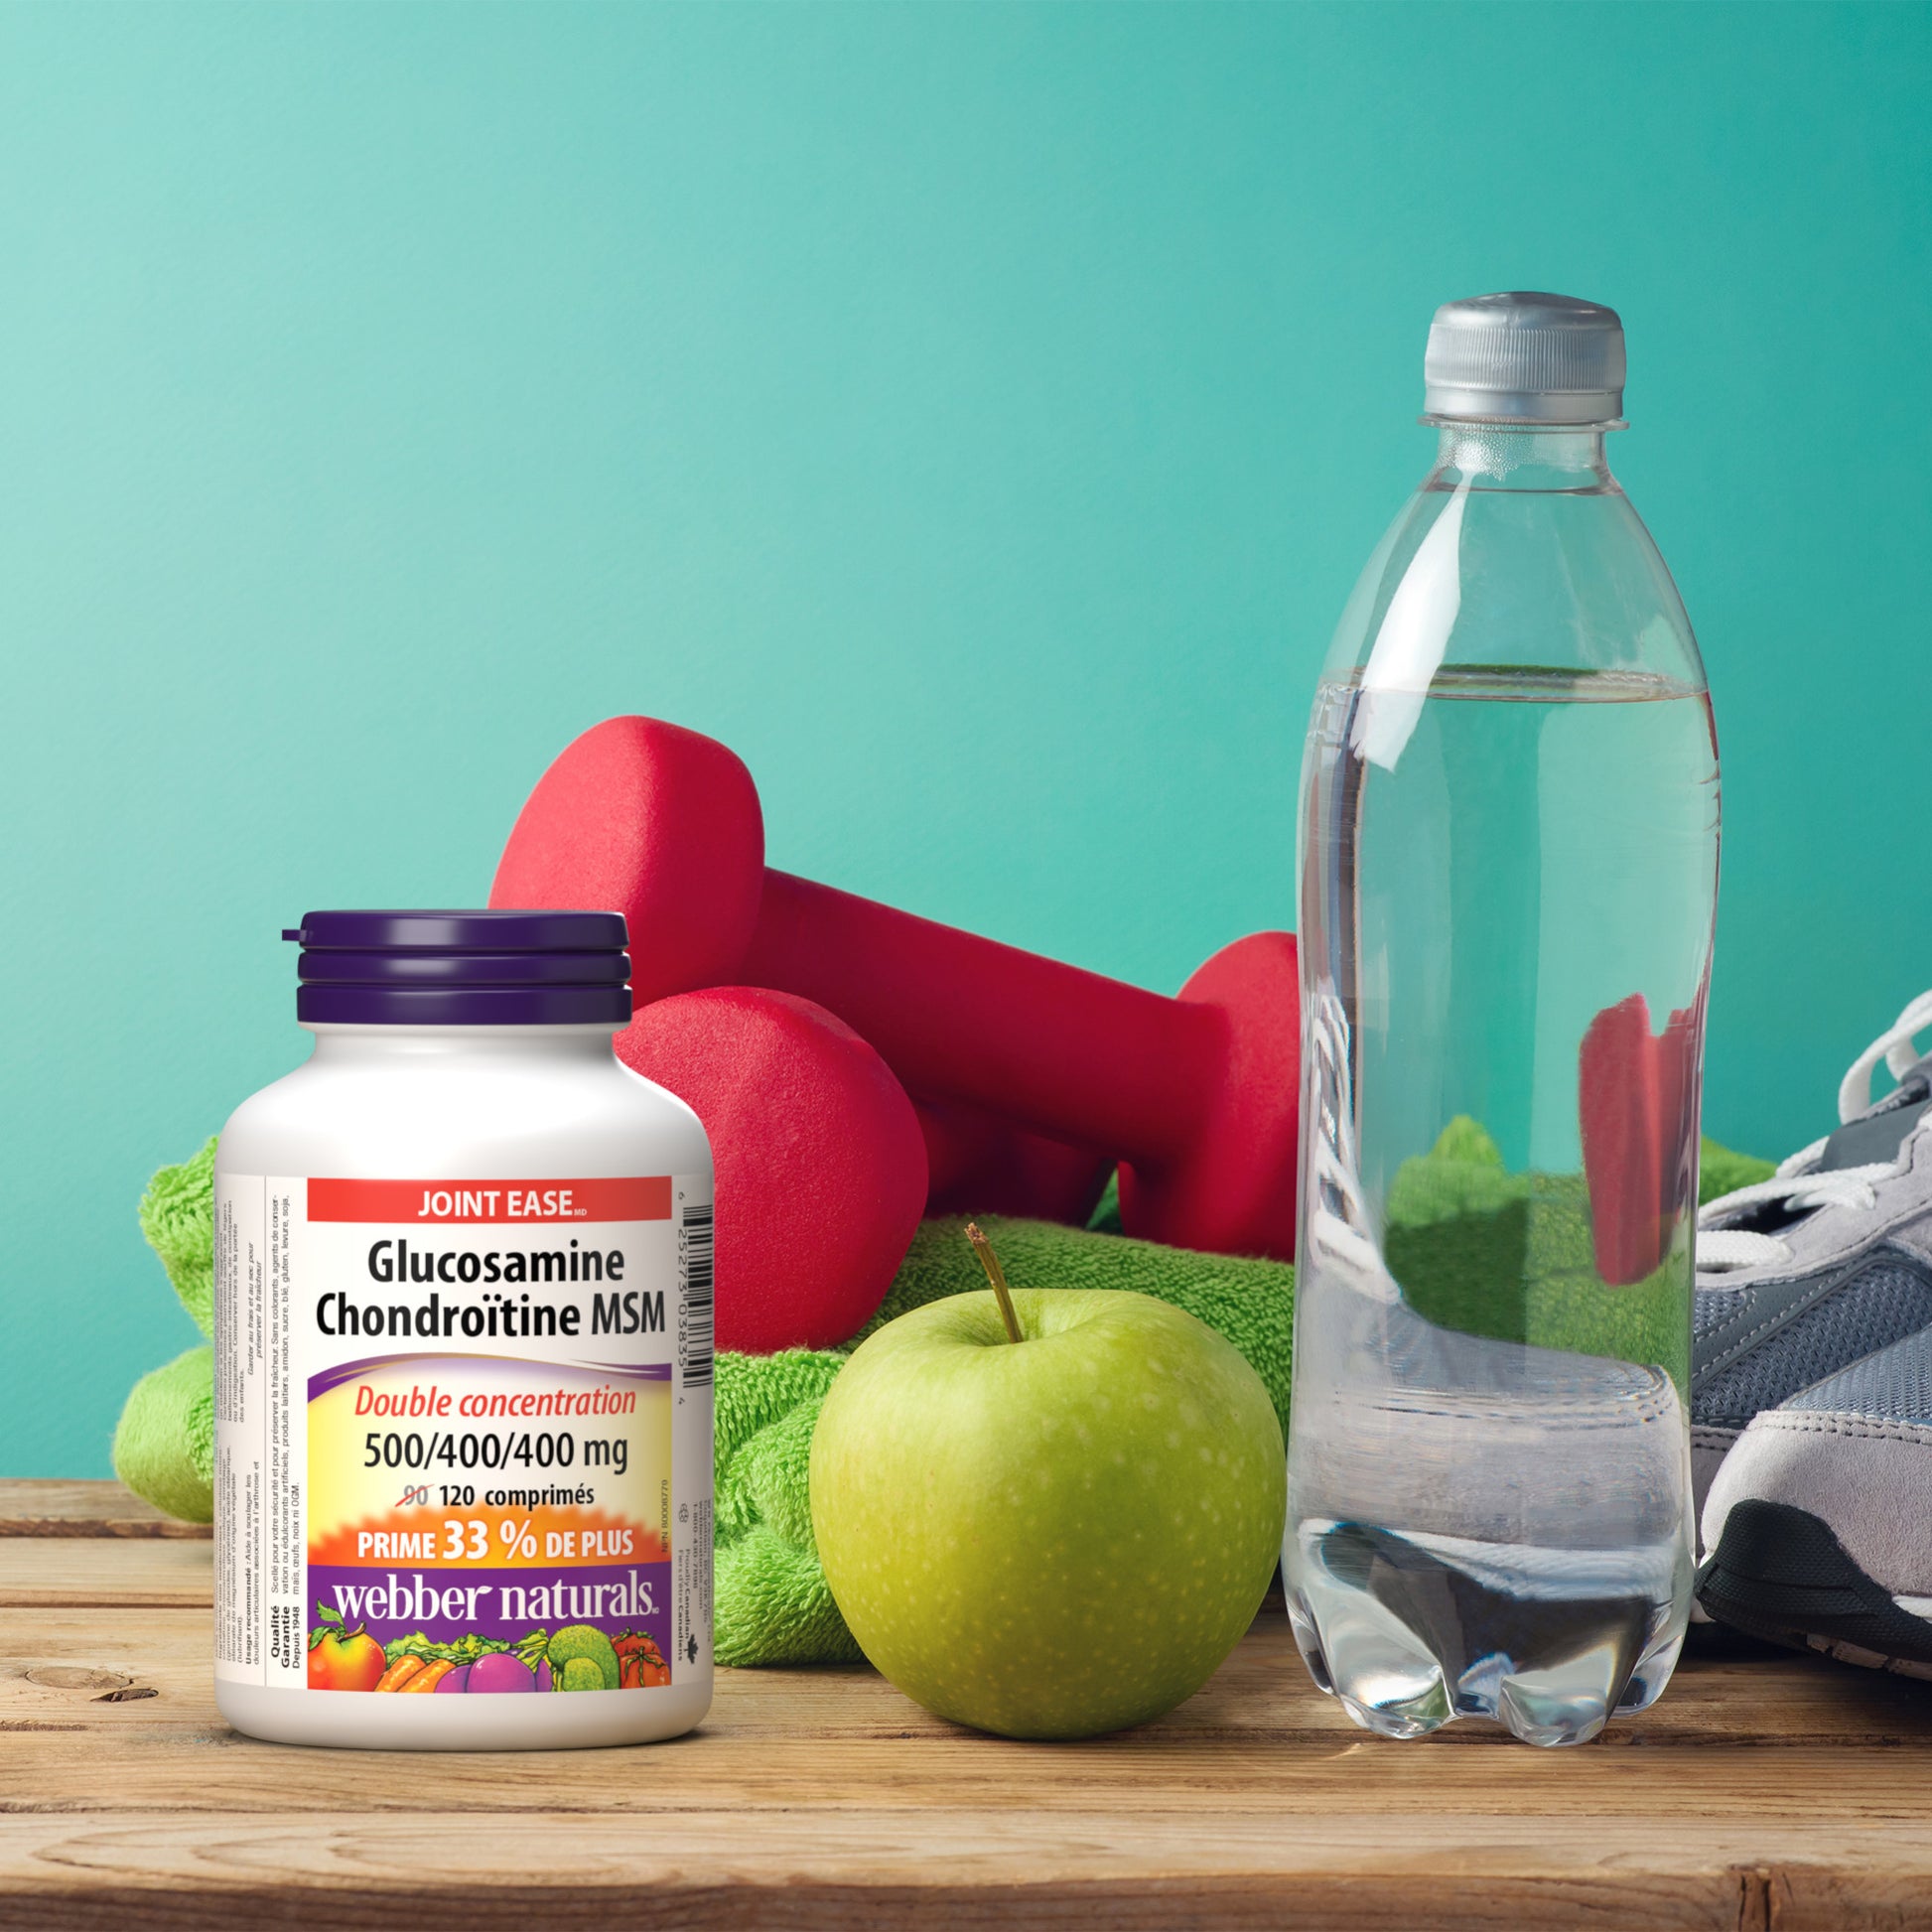 specifications-Glucosamine Chondroïtine MSM Double concentration 500/400/400 mg for Webber Naturals